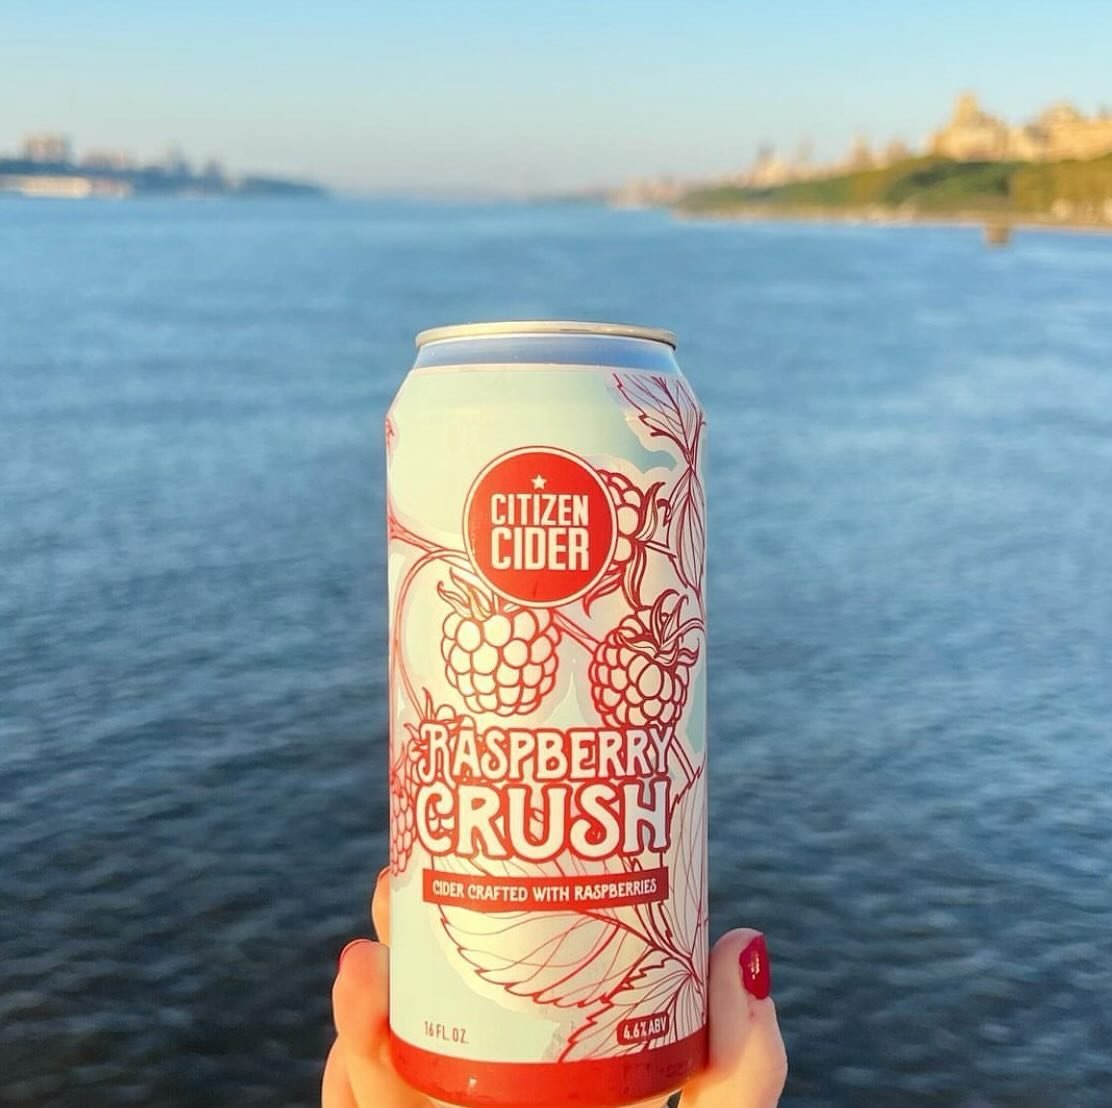 Came for the views. Stayed for the crush. #CanCrushin&rsquo; #LakesideVibes